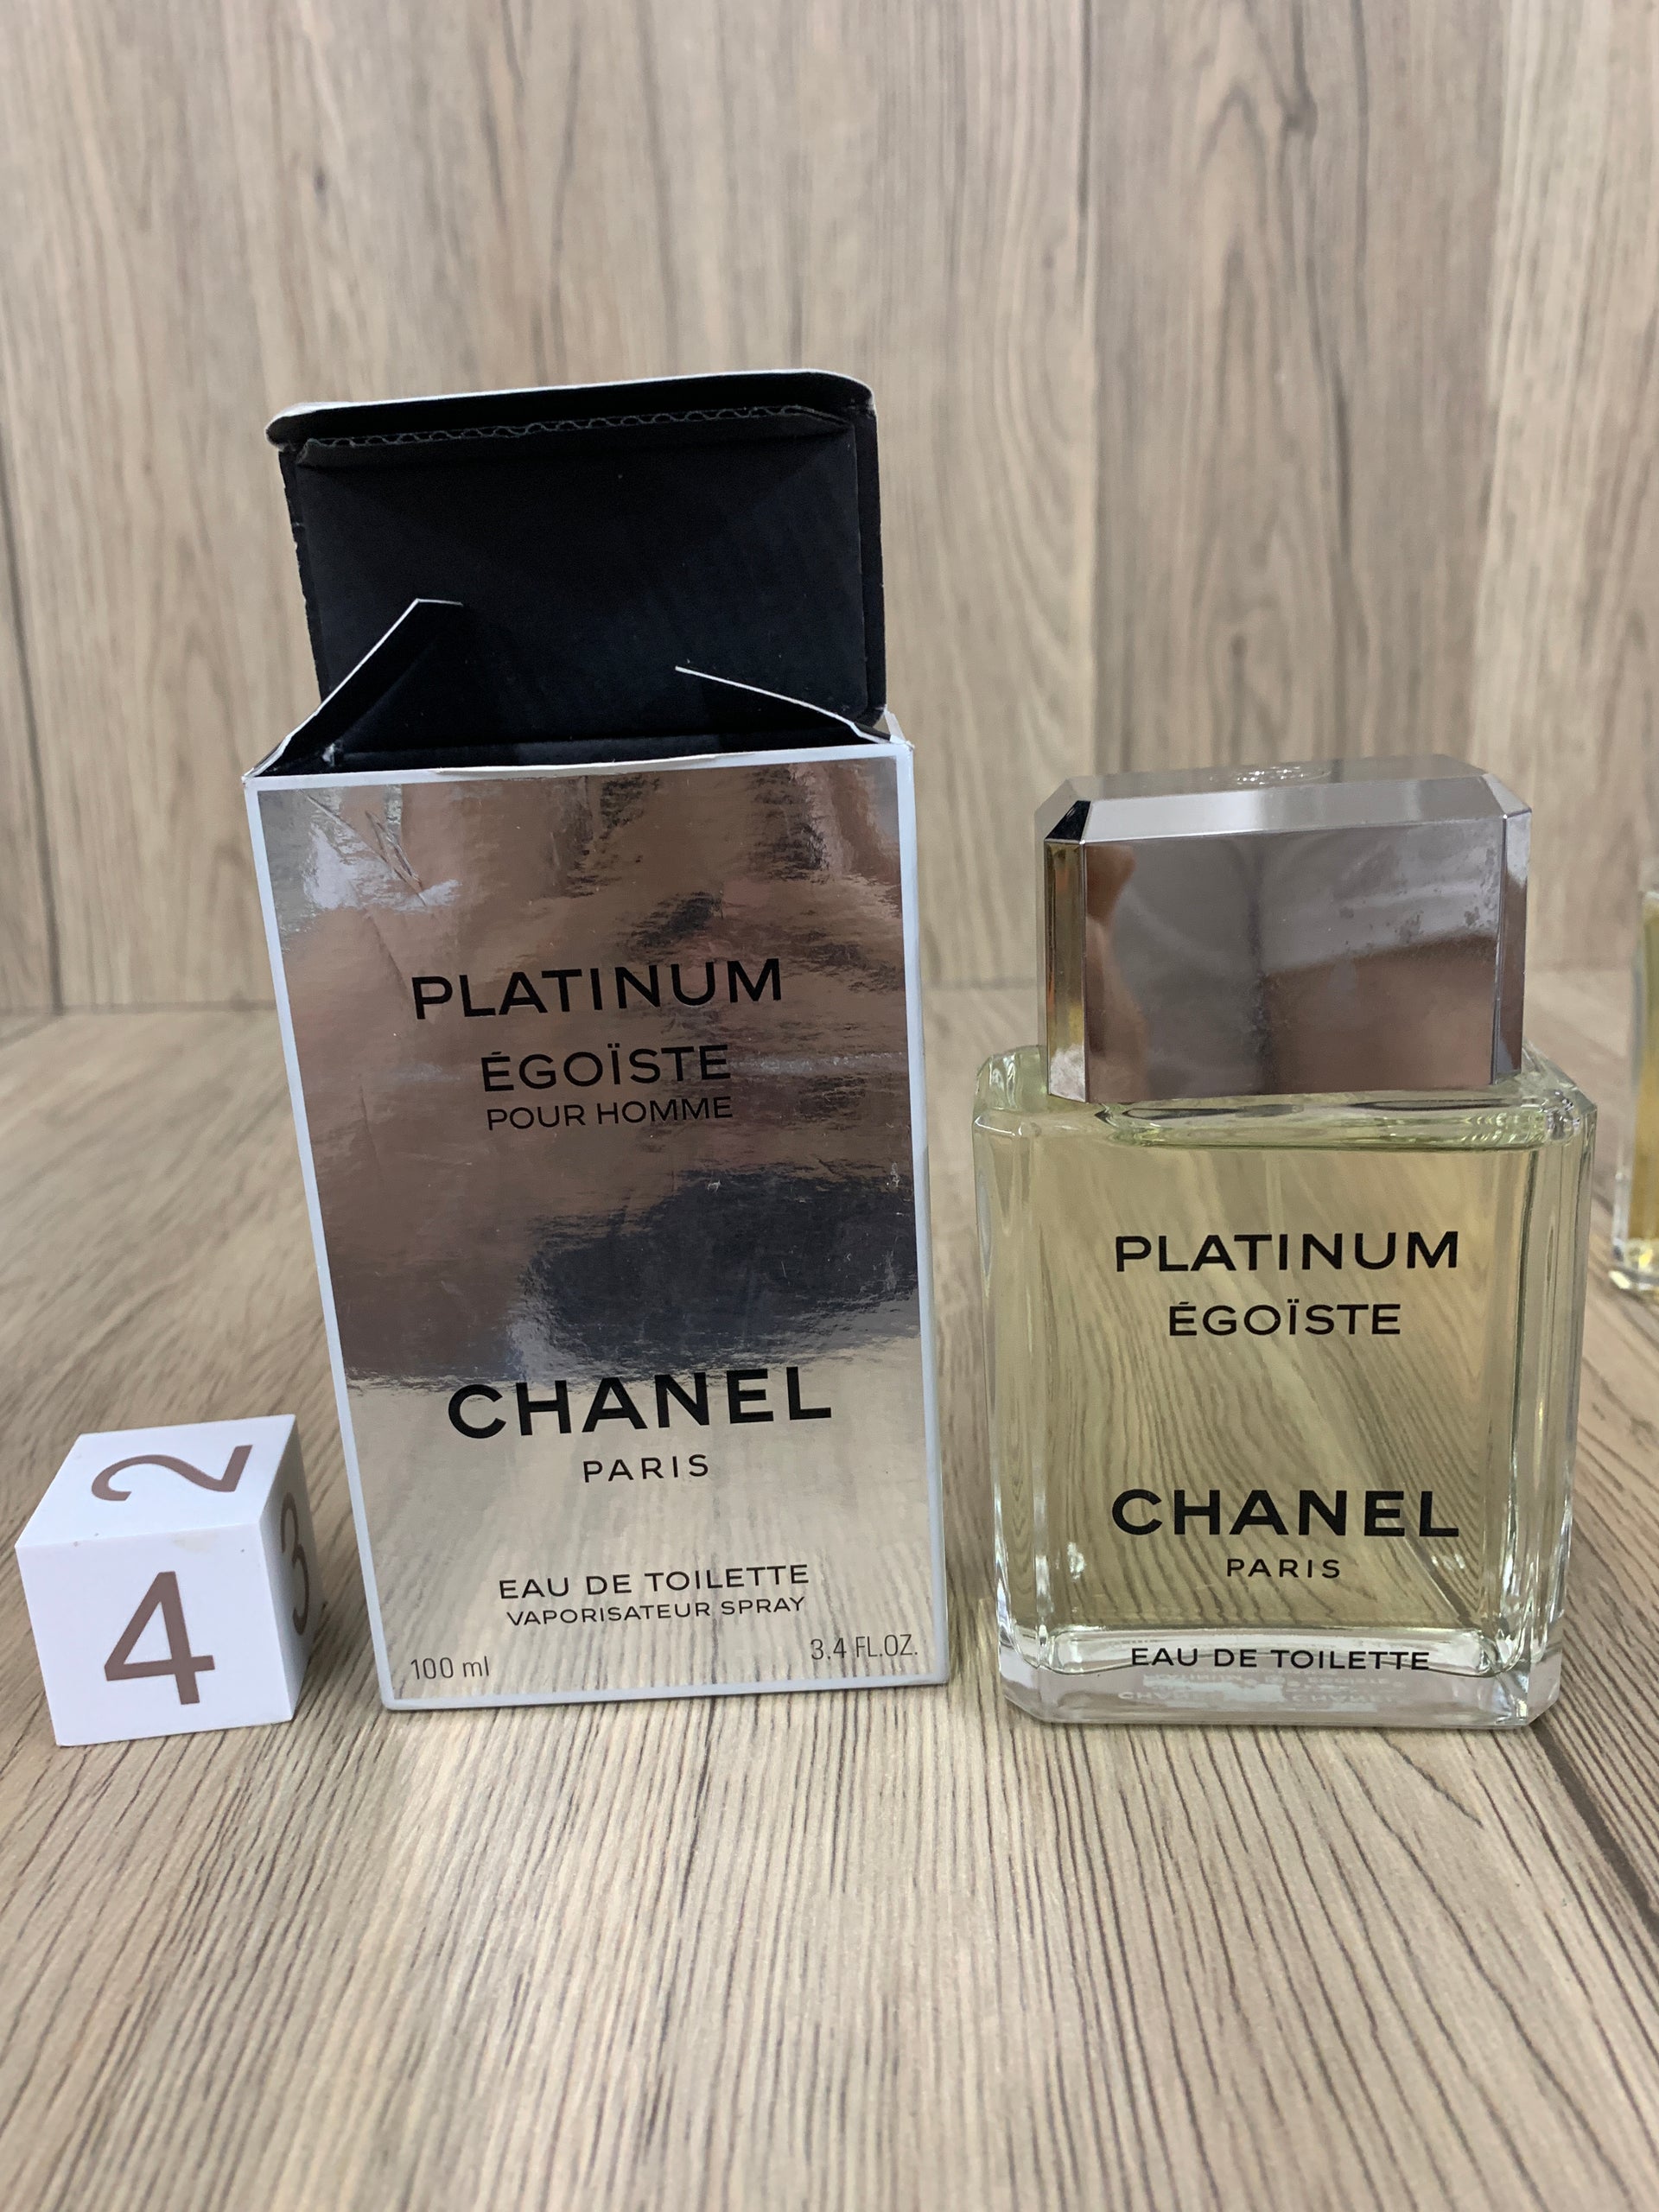 CHANEL Spray Chanel No 5 Perfumes for Women for sale